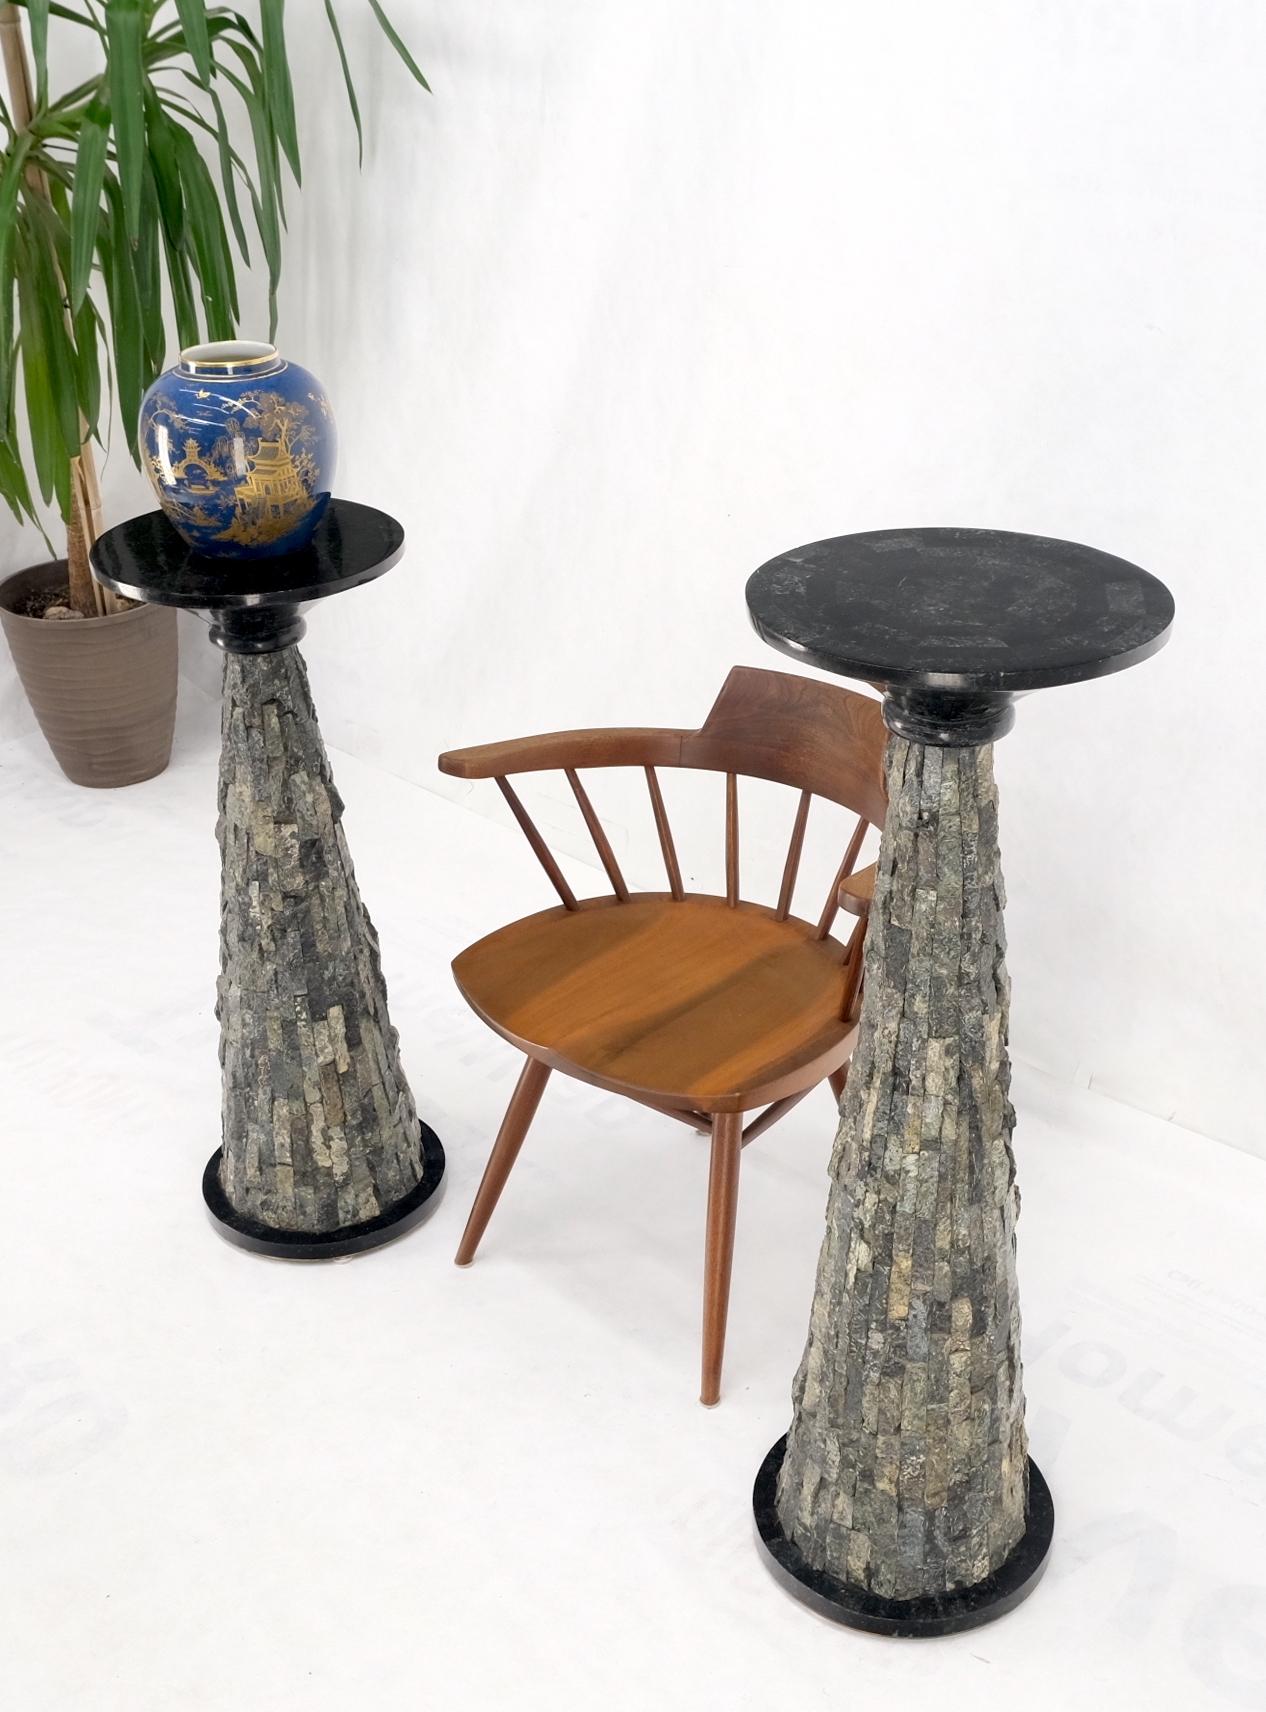 Pair of Polished & Rough Stone Tiles Cone Shape Non Matching Pair of Pedestals  For Sale 2